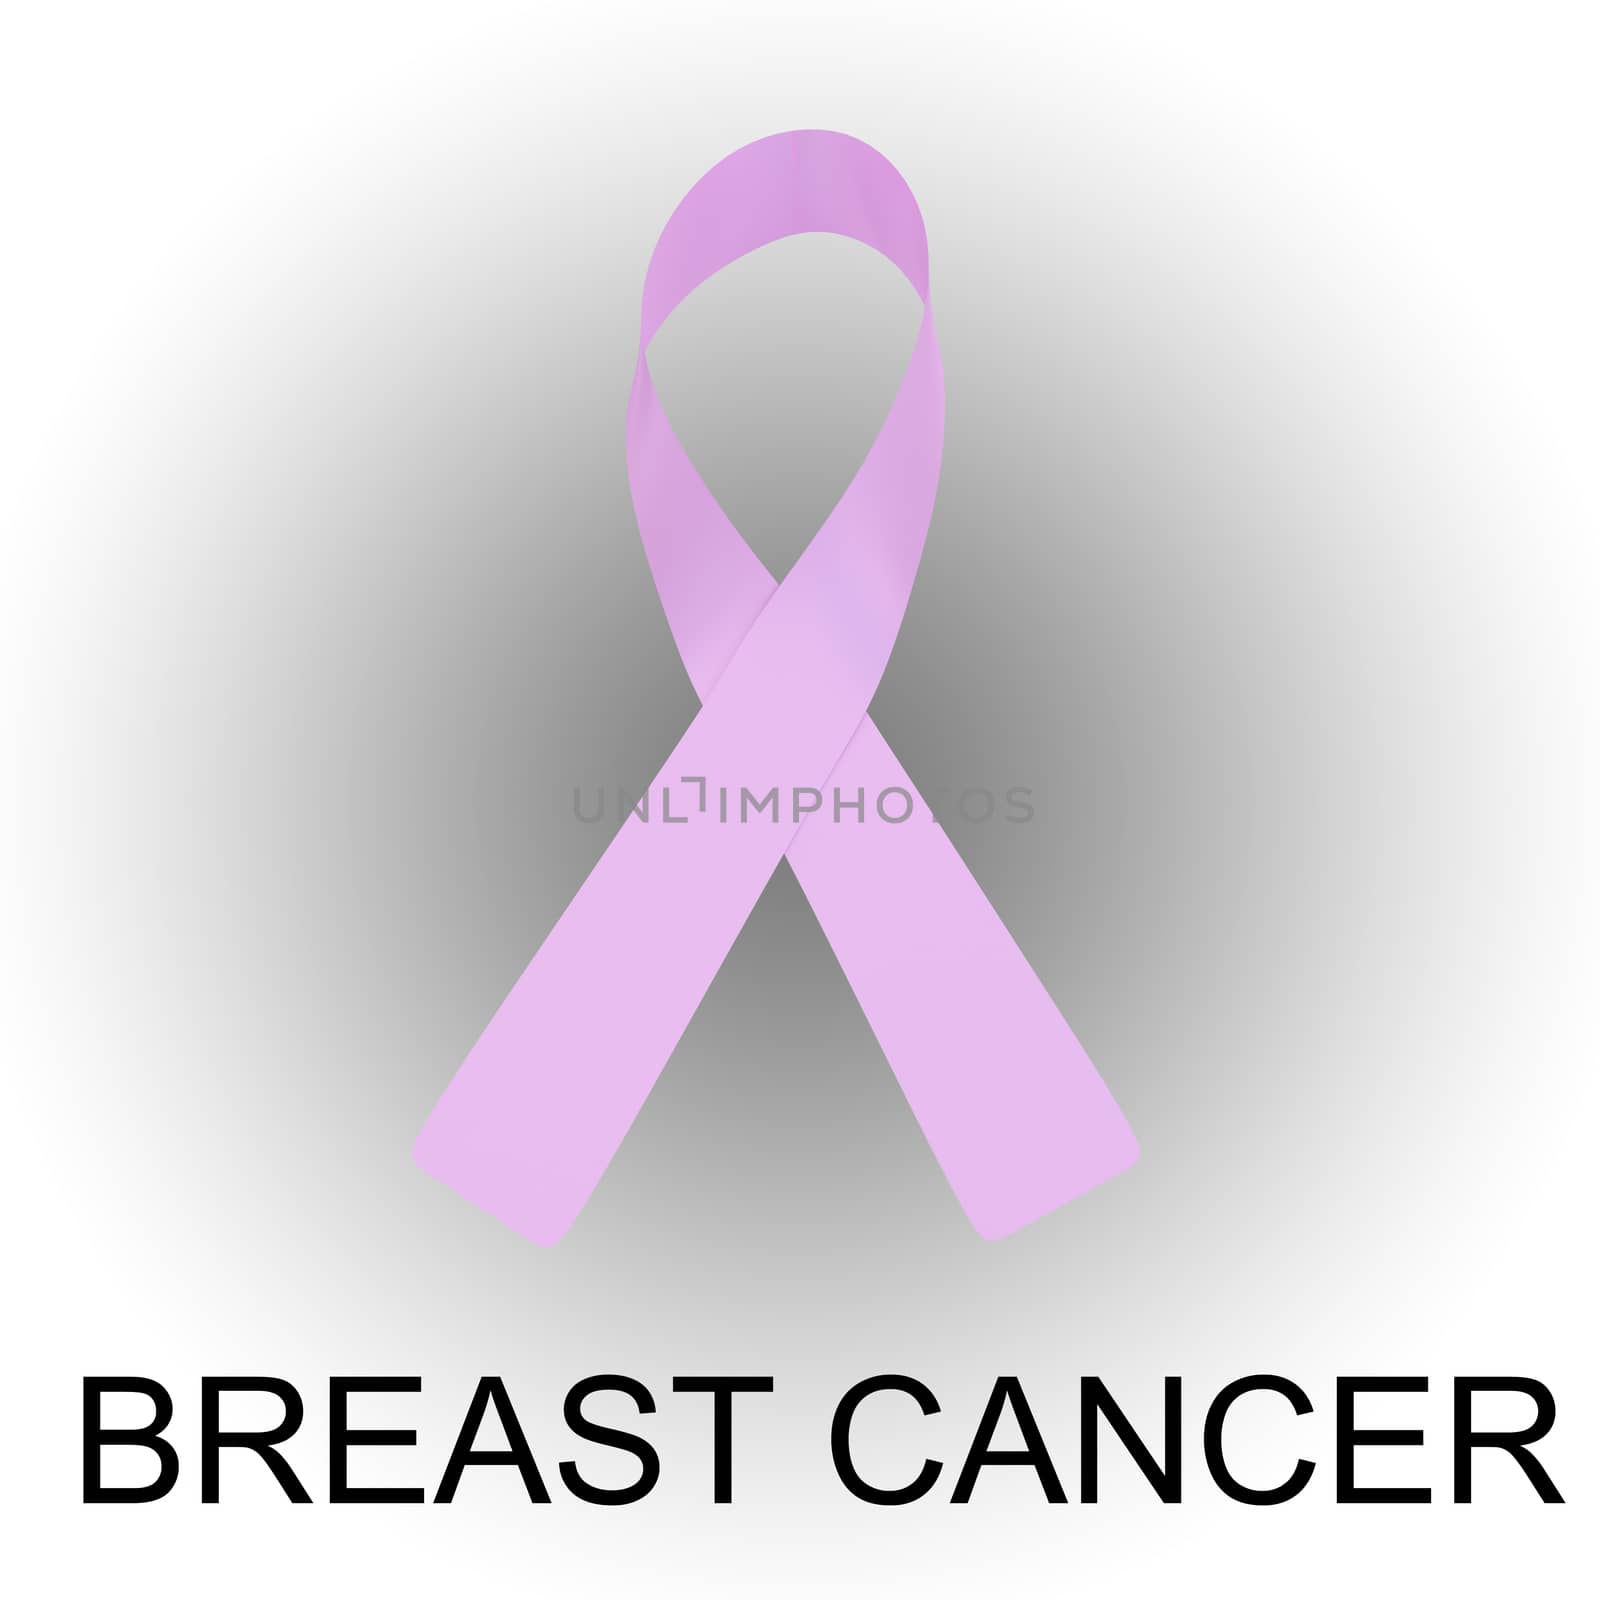 Breast Cancer concept by HD_premium_shots